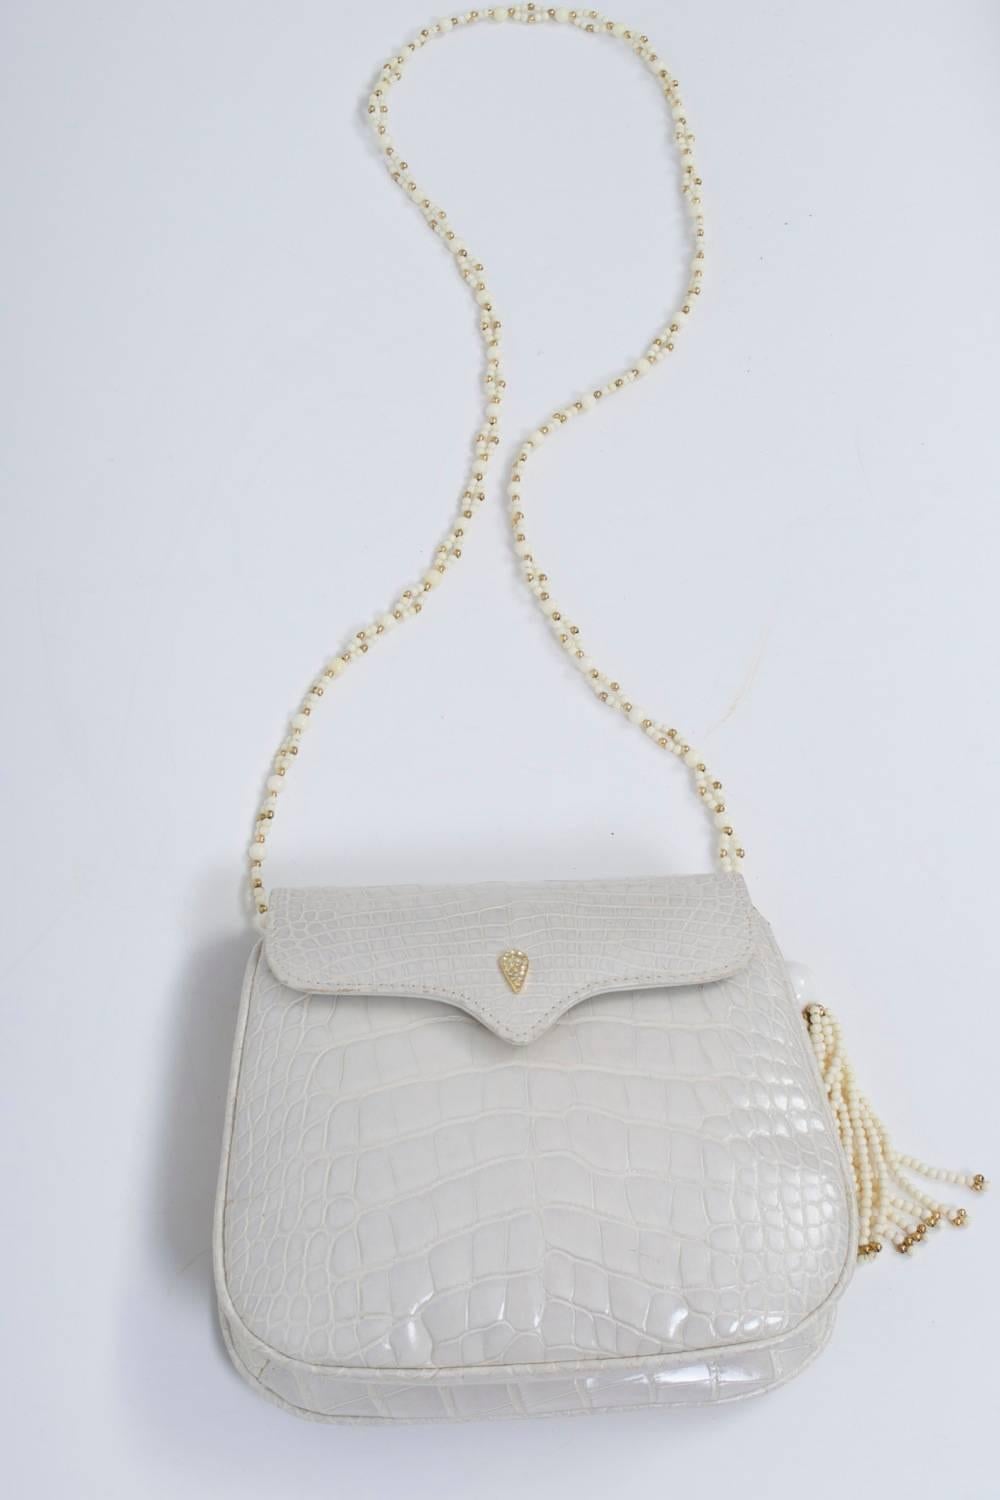 Lana White Alligator Clutch with Two Shoulder Straps 2